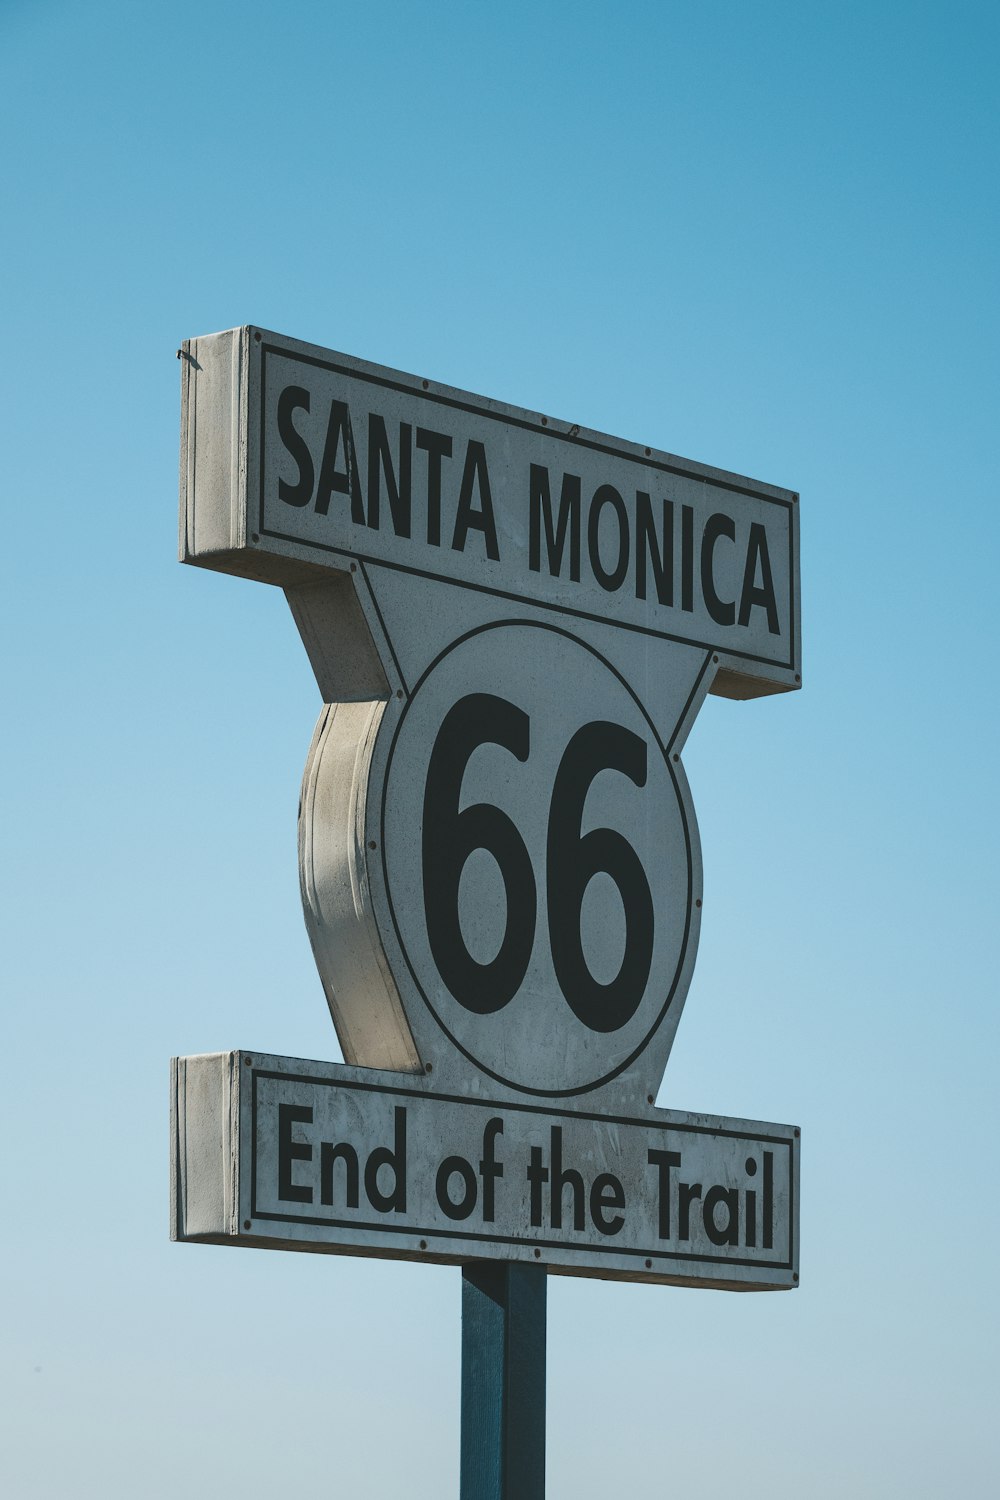 Santa Monica End of the Trail signage